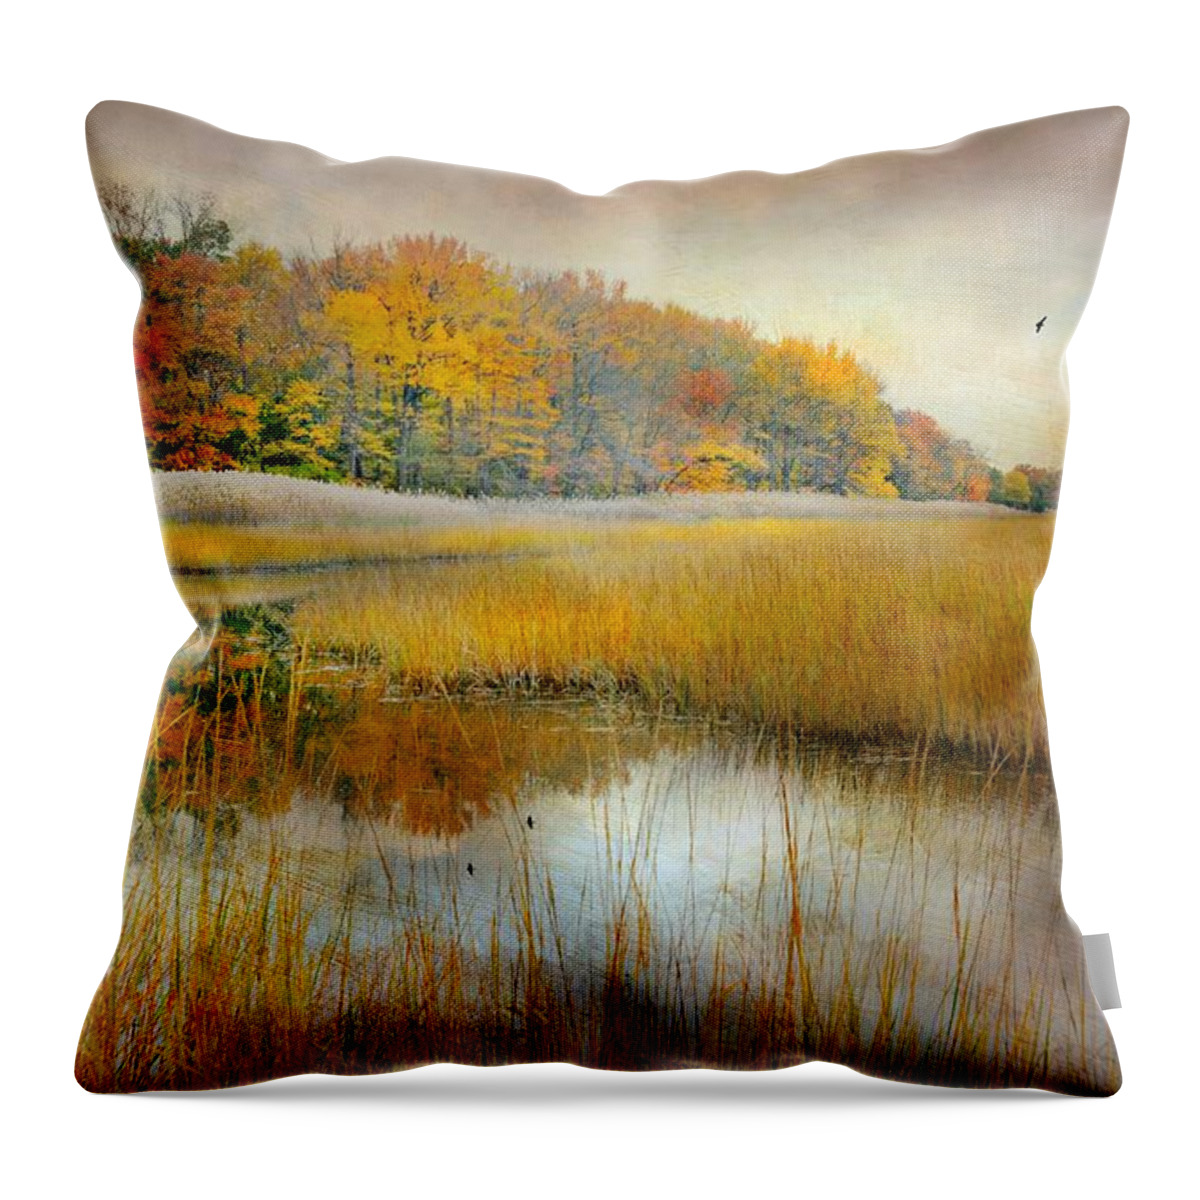 Landscape Throw Pillow featuring the photograph Come What May by Diana Angstadt